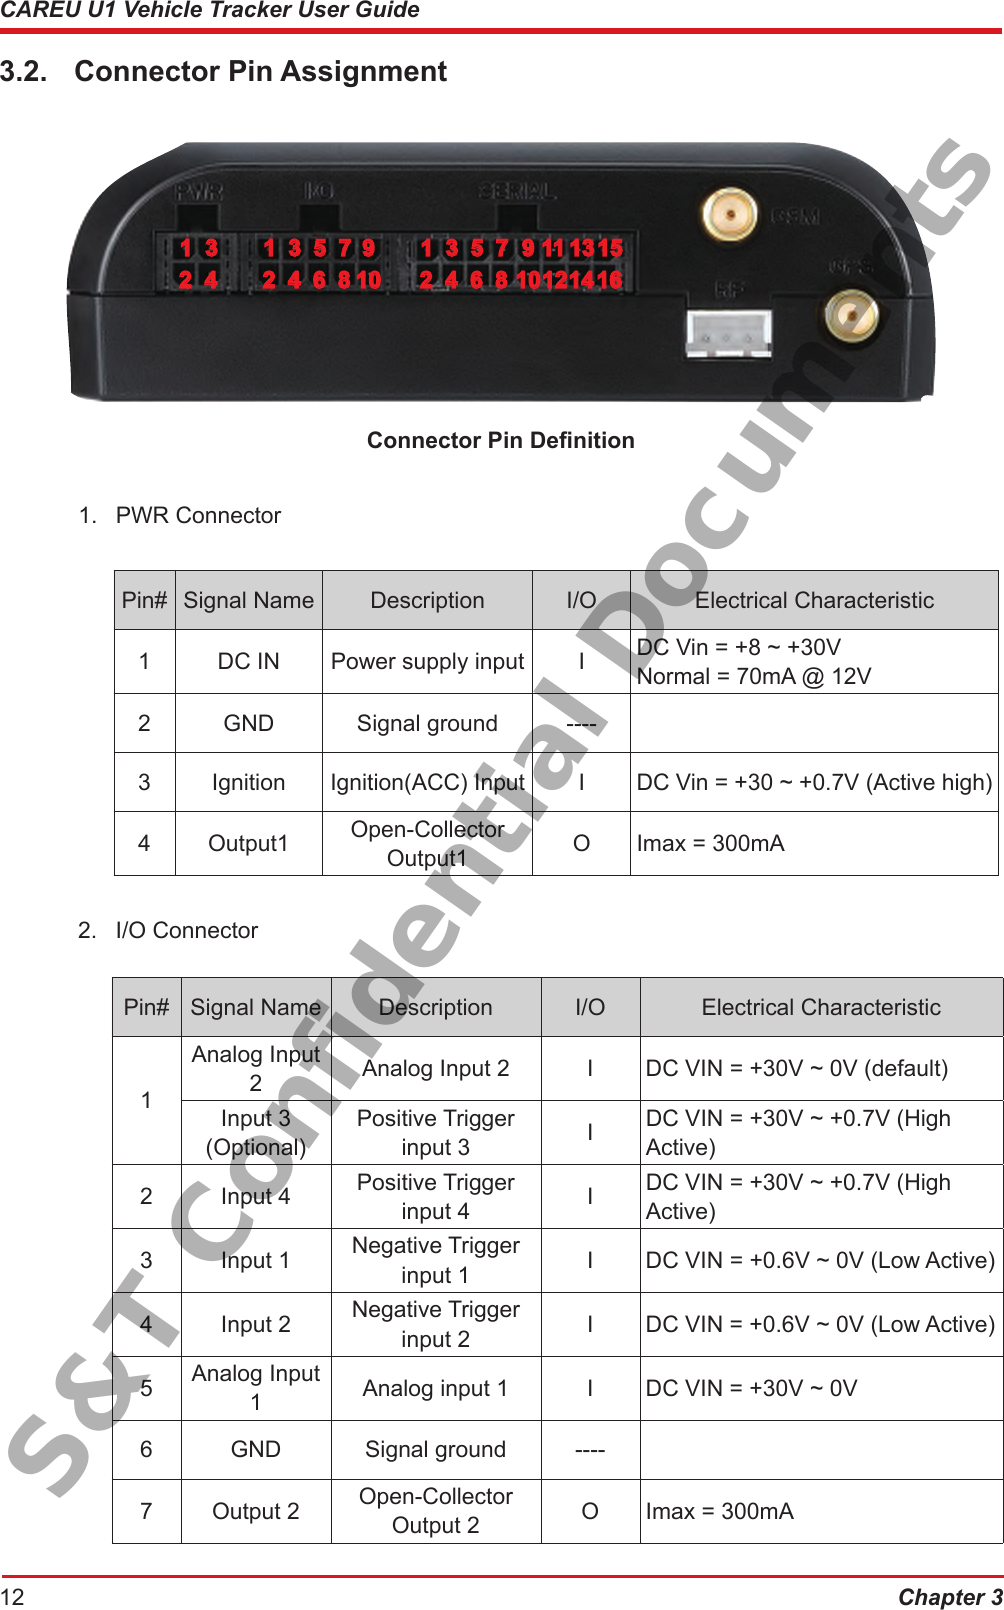 Chapter 312CAREU U1 Vehicle Tracker User Guide3.2.  Connector Pin AssignmentConnector Pin Denition1.  PWR ConnectorPin# Signal Name Description I/O Electrical Characteristic1 DC IN Power supply input I DC Vin = +8 ~ +30VNormal = 70mA @ 12V2 GND Signal ground ----3 Ignition Ignition(ACC) Input I DC Vin = +30 ~ +0.7V (Active high) 4 Output1 Open-Collector Output1 O Imax = 300mA   2.  I/O ConnectorPin# Signal Name Description I/O Electrical Characteristic1Analog Input 2Analog Input 2 I DC VIN = +30V ~ 0V (default)Input 3 (Optional)Positive Trigger input 3 IDC VIN = +30V ~ +0.7V (High Active)2 Input 4 Positive Trigger input 4 IDC VIN = +30V ~ +0.7V (High Active)3 Input 1 Negative Trigger input 1 I DC VIN = +0.6V ~ 0V (Low Active)4 Input 2 Negative Trigger input 2 I DC VIN = +0.6V ~ 0V (Low Active)5Analog Input 1Analog input 1 I DC VIN = +30V ~ 0V6 GND Signal ground ----7 Output 2 Open-Collector Output 2 O Imax = 300mA11 91 95 5 133 3 3 117 7 1522 102 106 6 144 4 4 128 8 16S&amp;T Confidential Documents